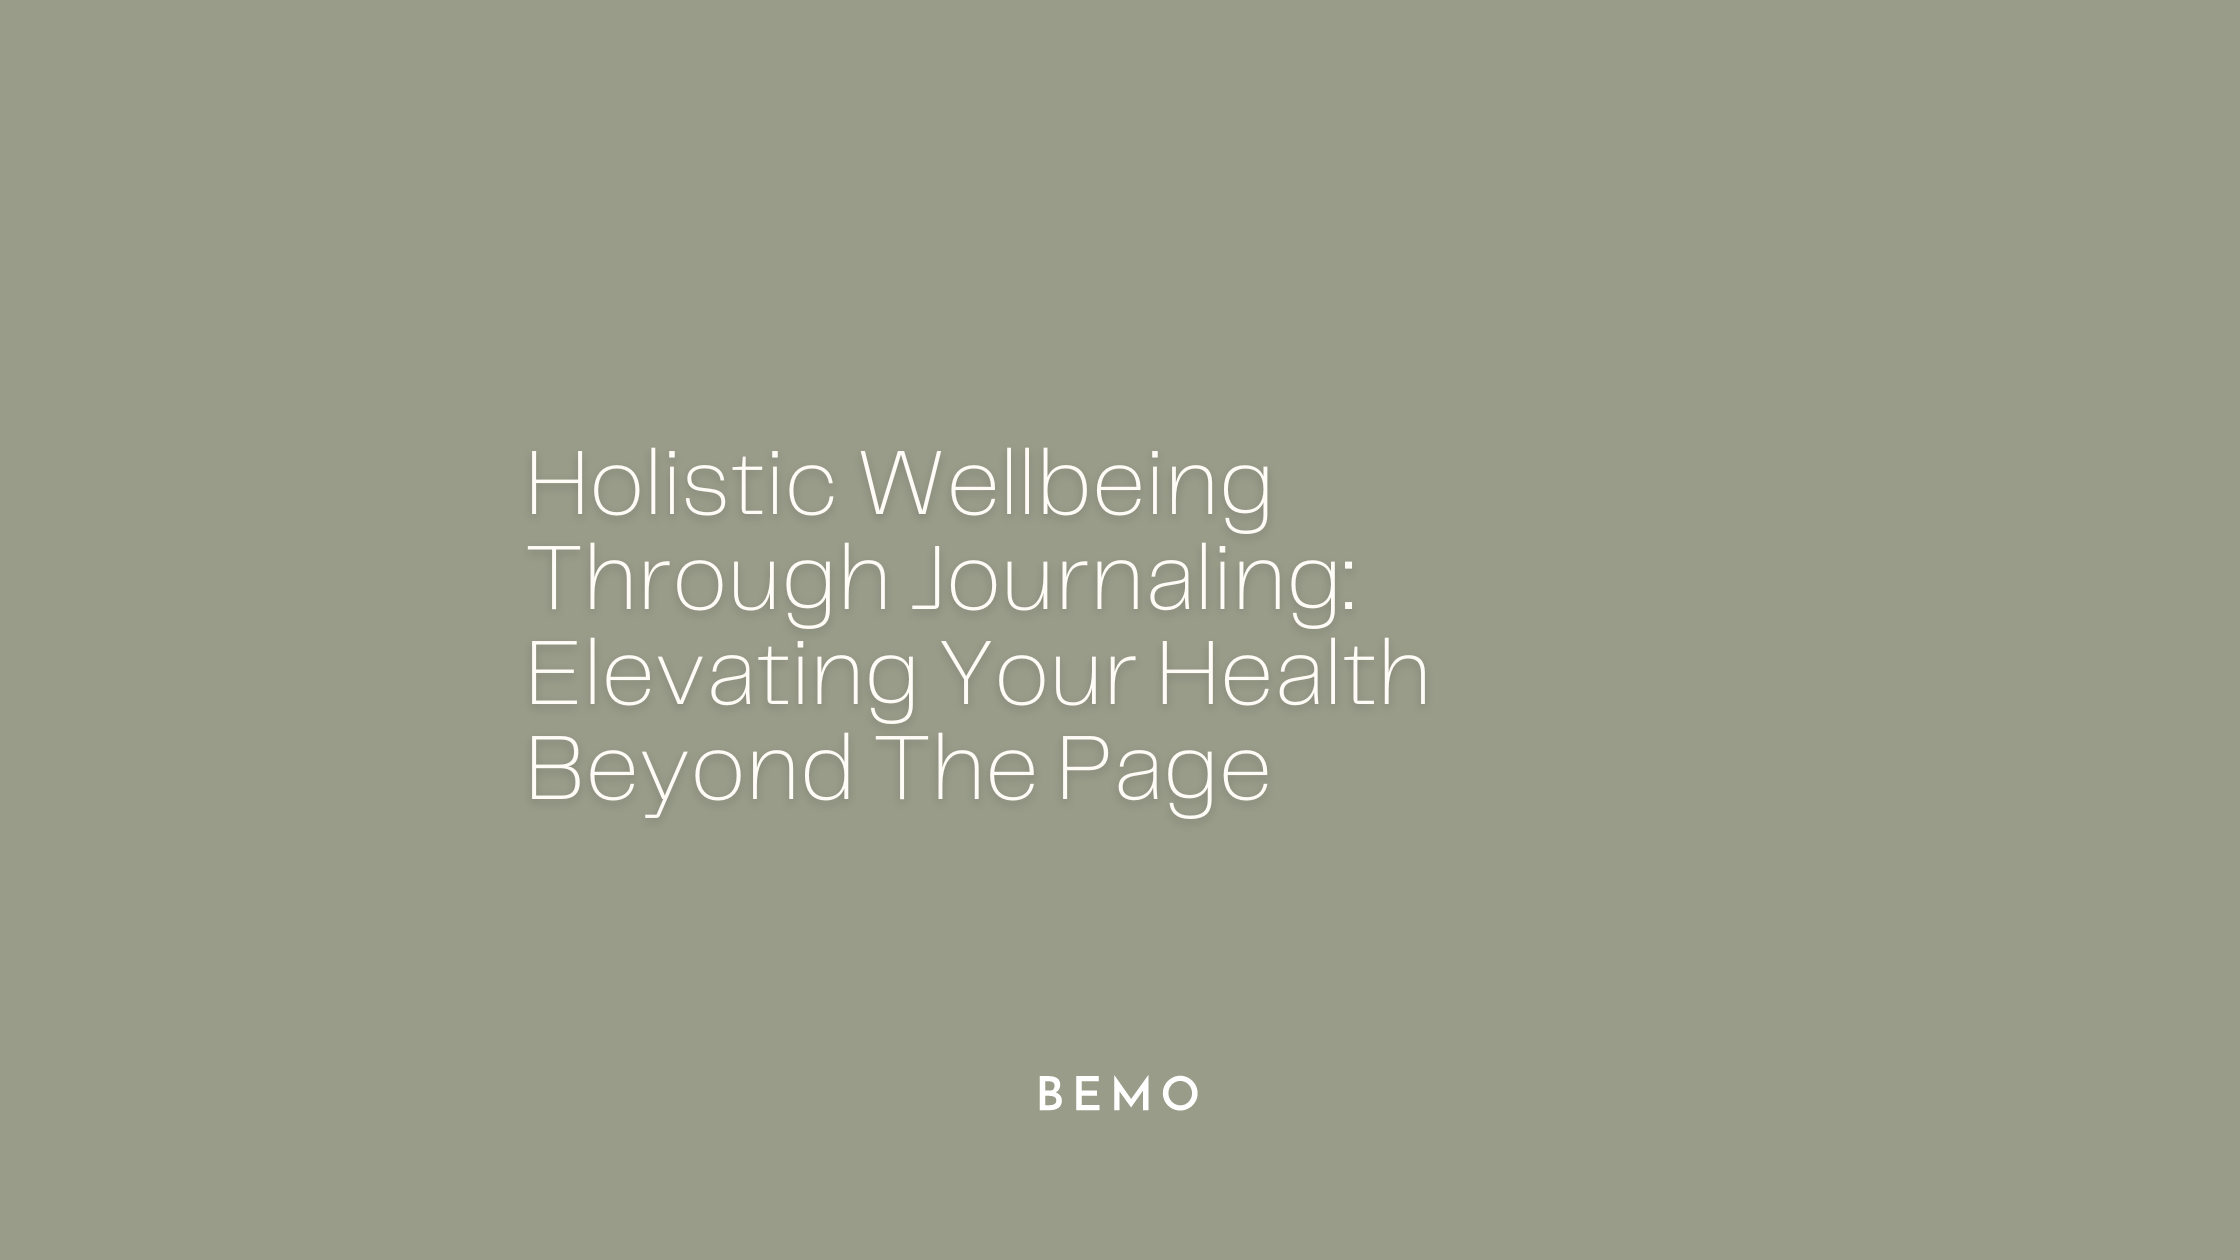 Holistic Wellbeing Through Journaling: Elevating Your Health Beyond The Page